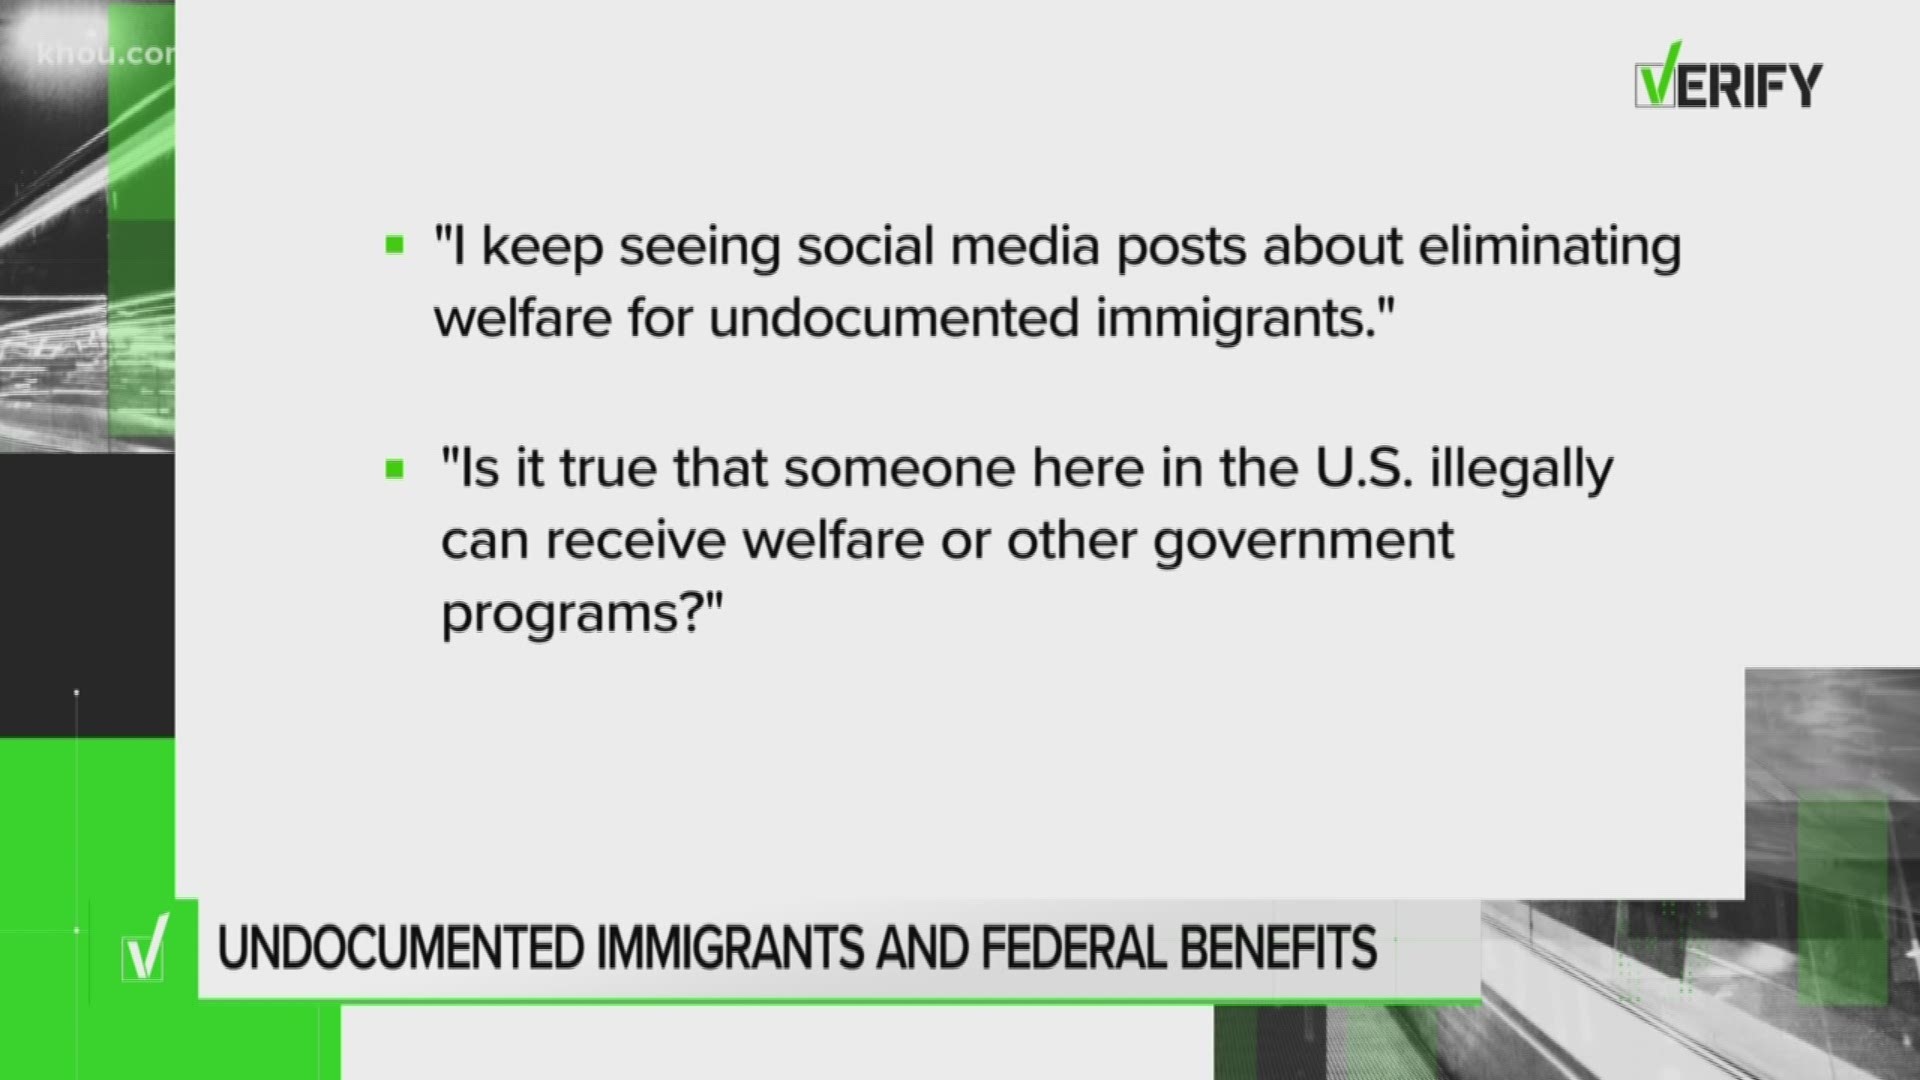 A viewer wanted to know whether undocumented immigrants can receive welfare. Our Verify researchers looked into the claim.